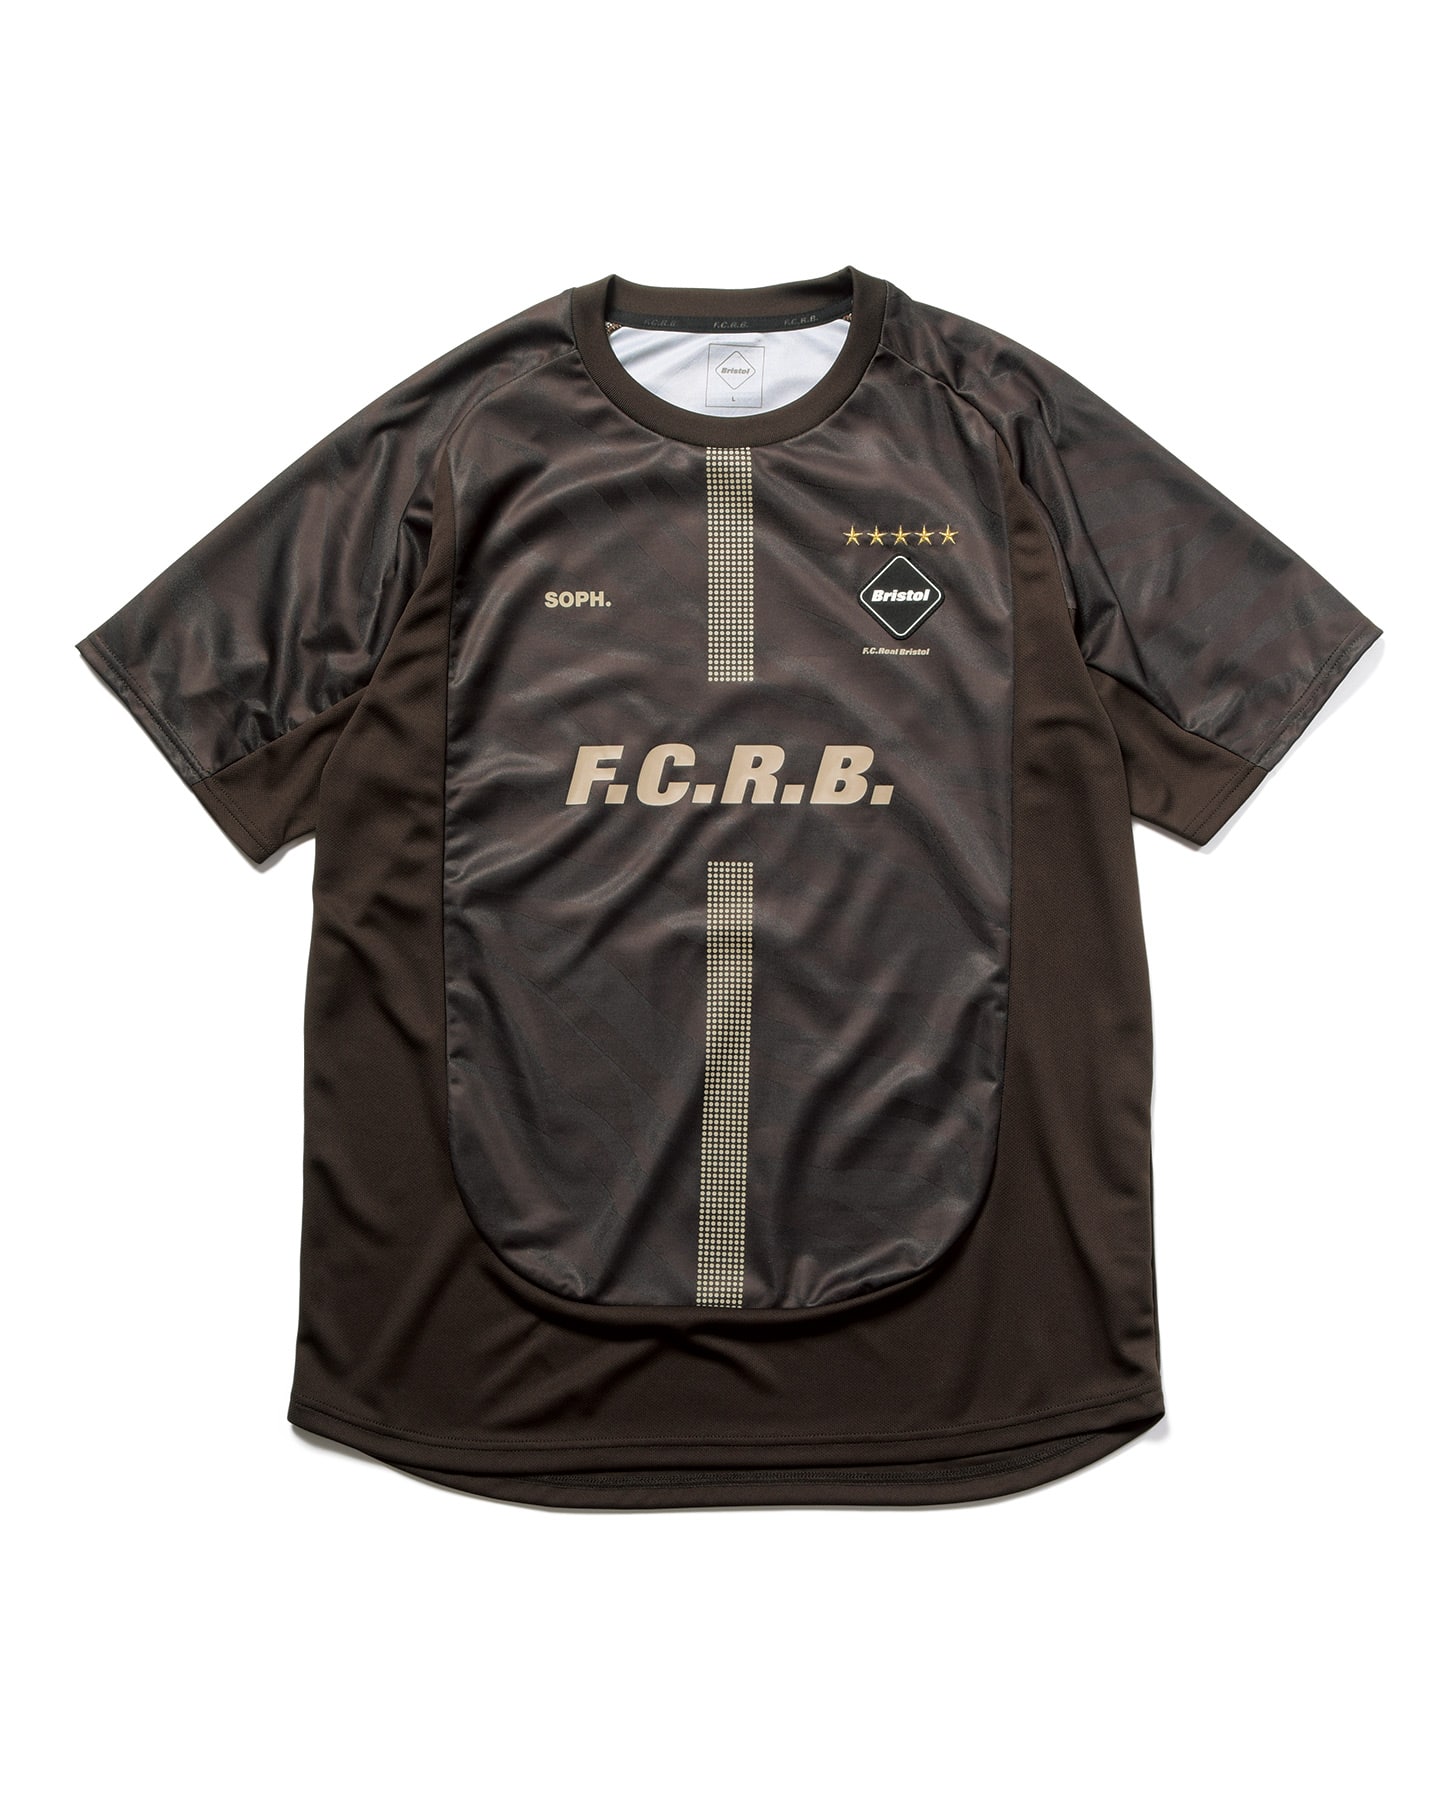 S 新品 送料無料 FCRB 22SS S/S PRE MATCH TOP